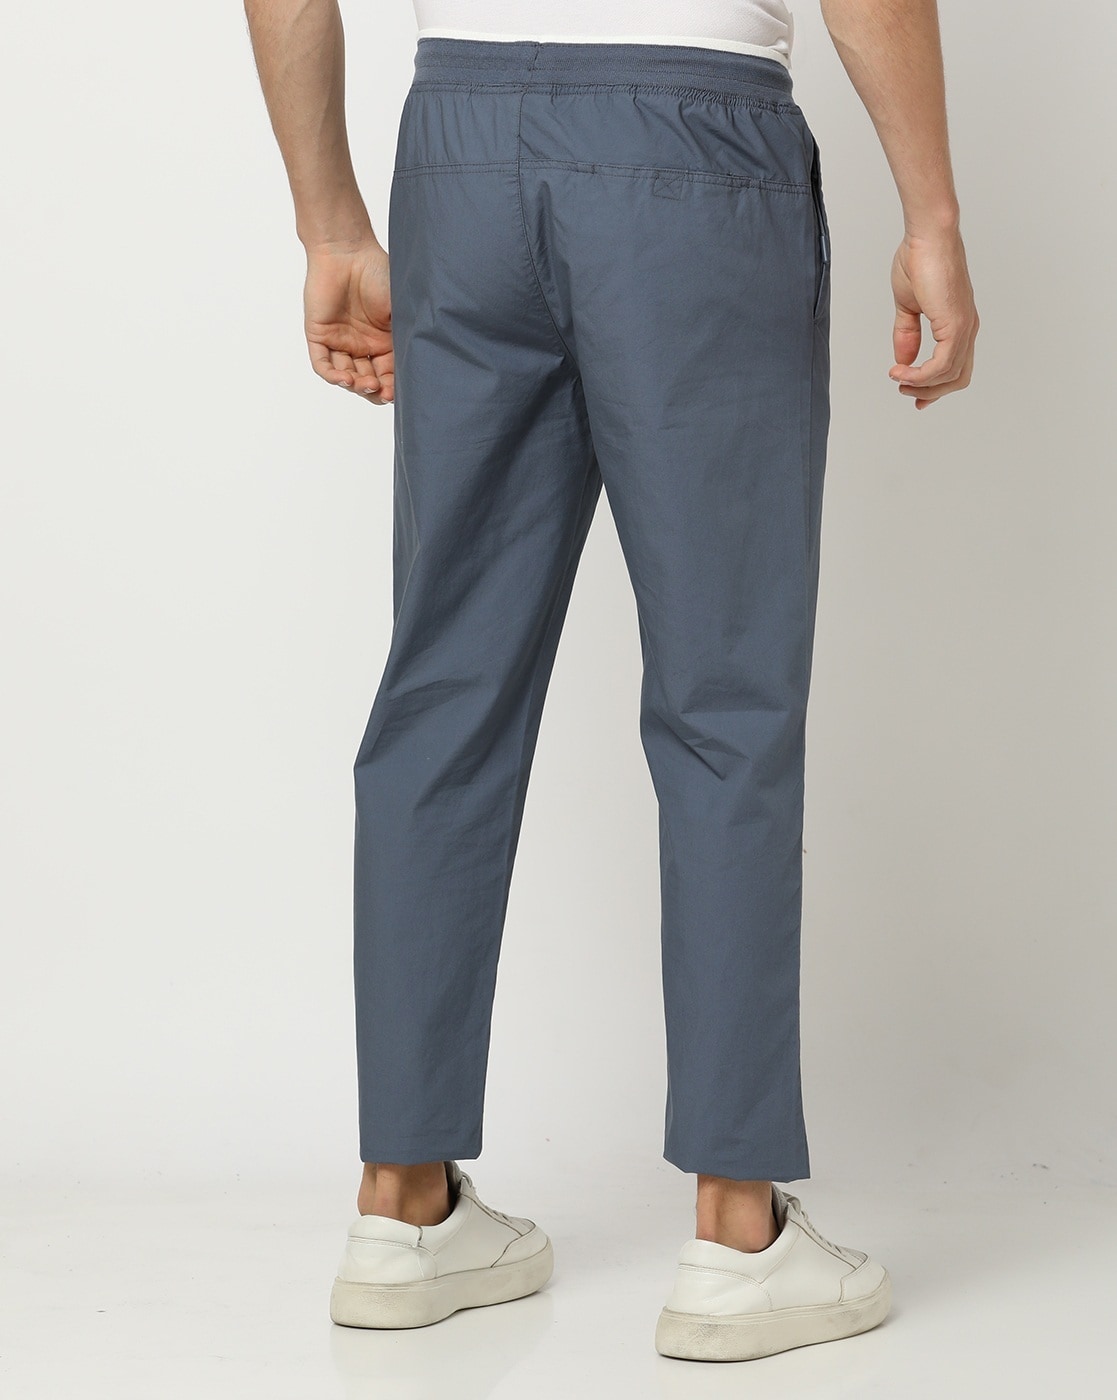 Buy Cargo Straight Pants Online at Best Prices in India - JioMart.